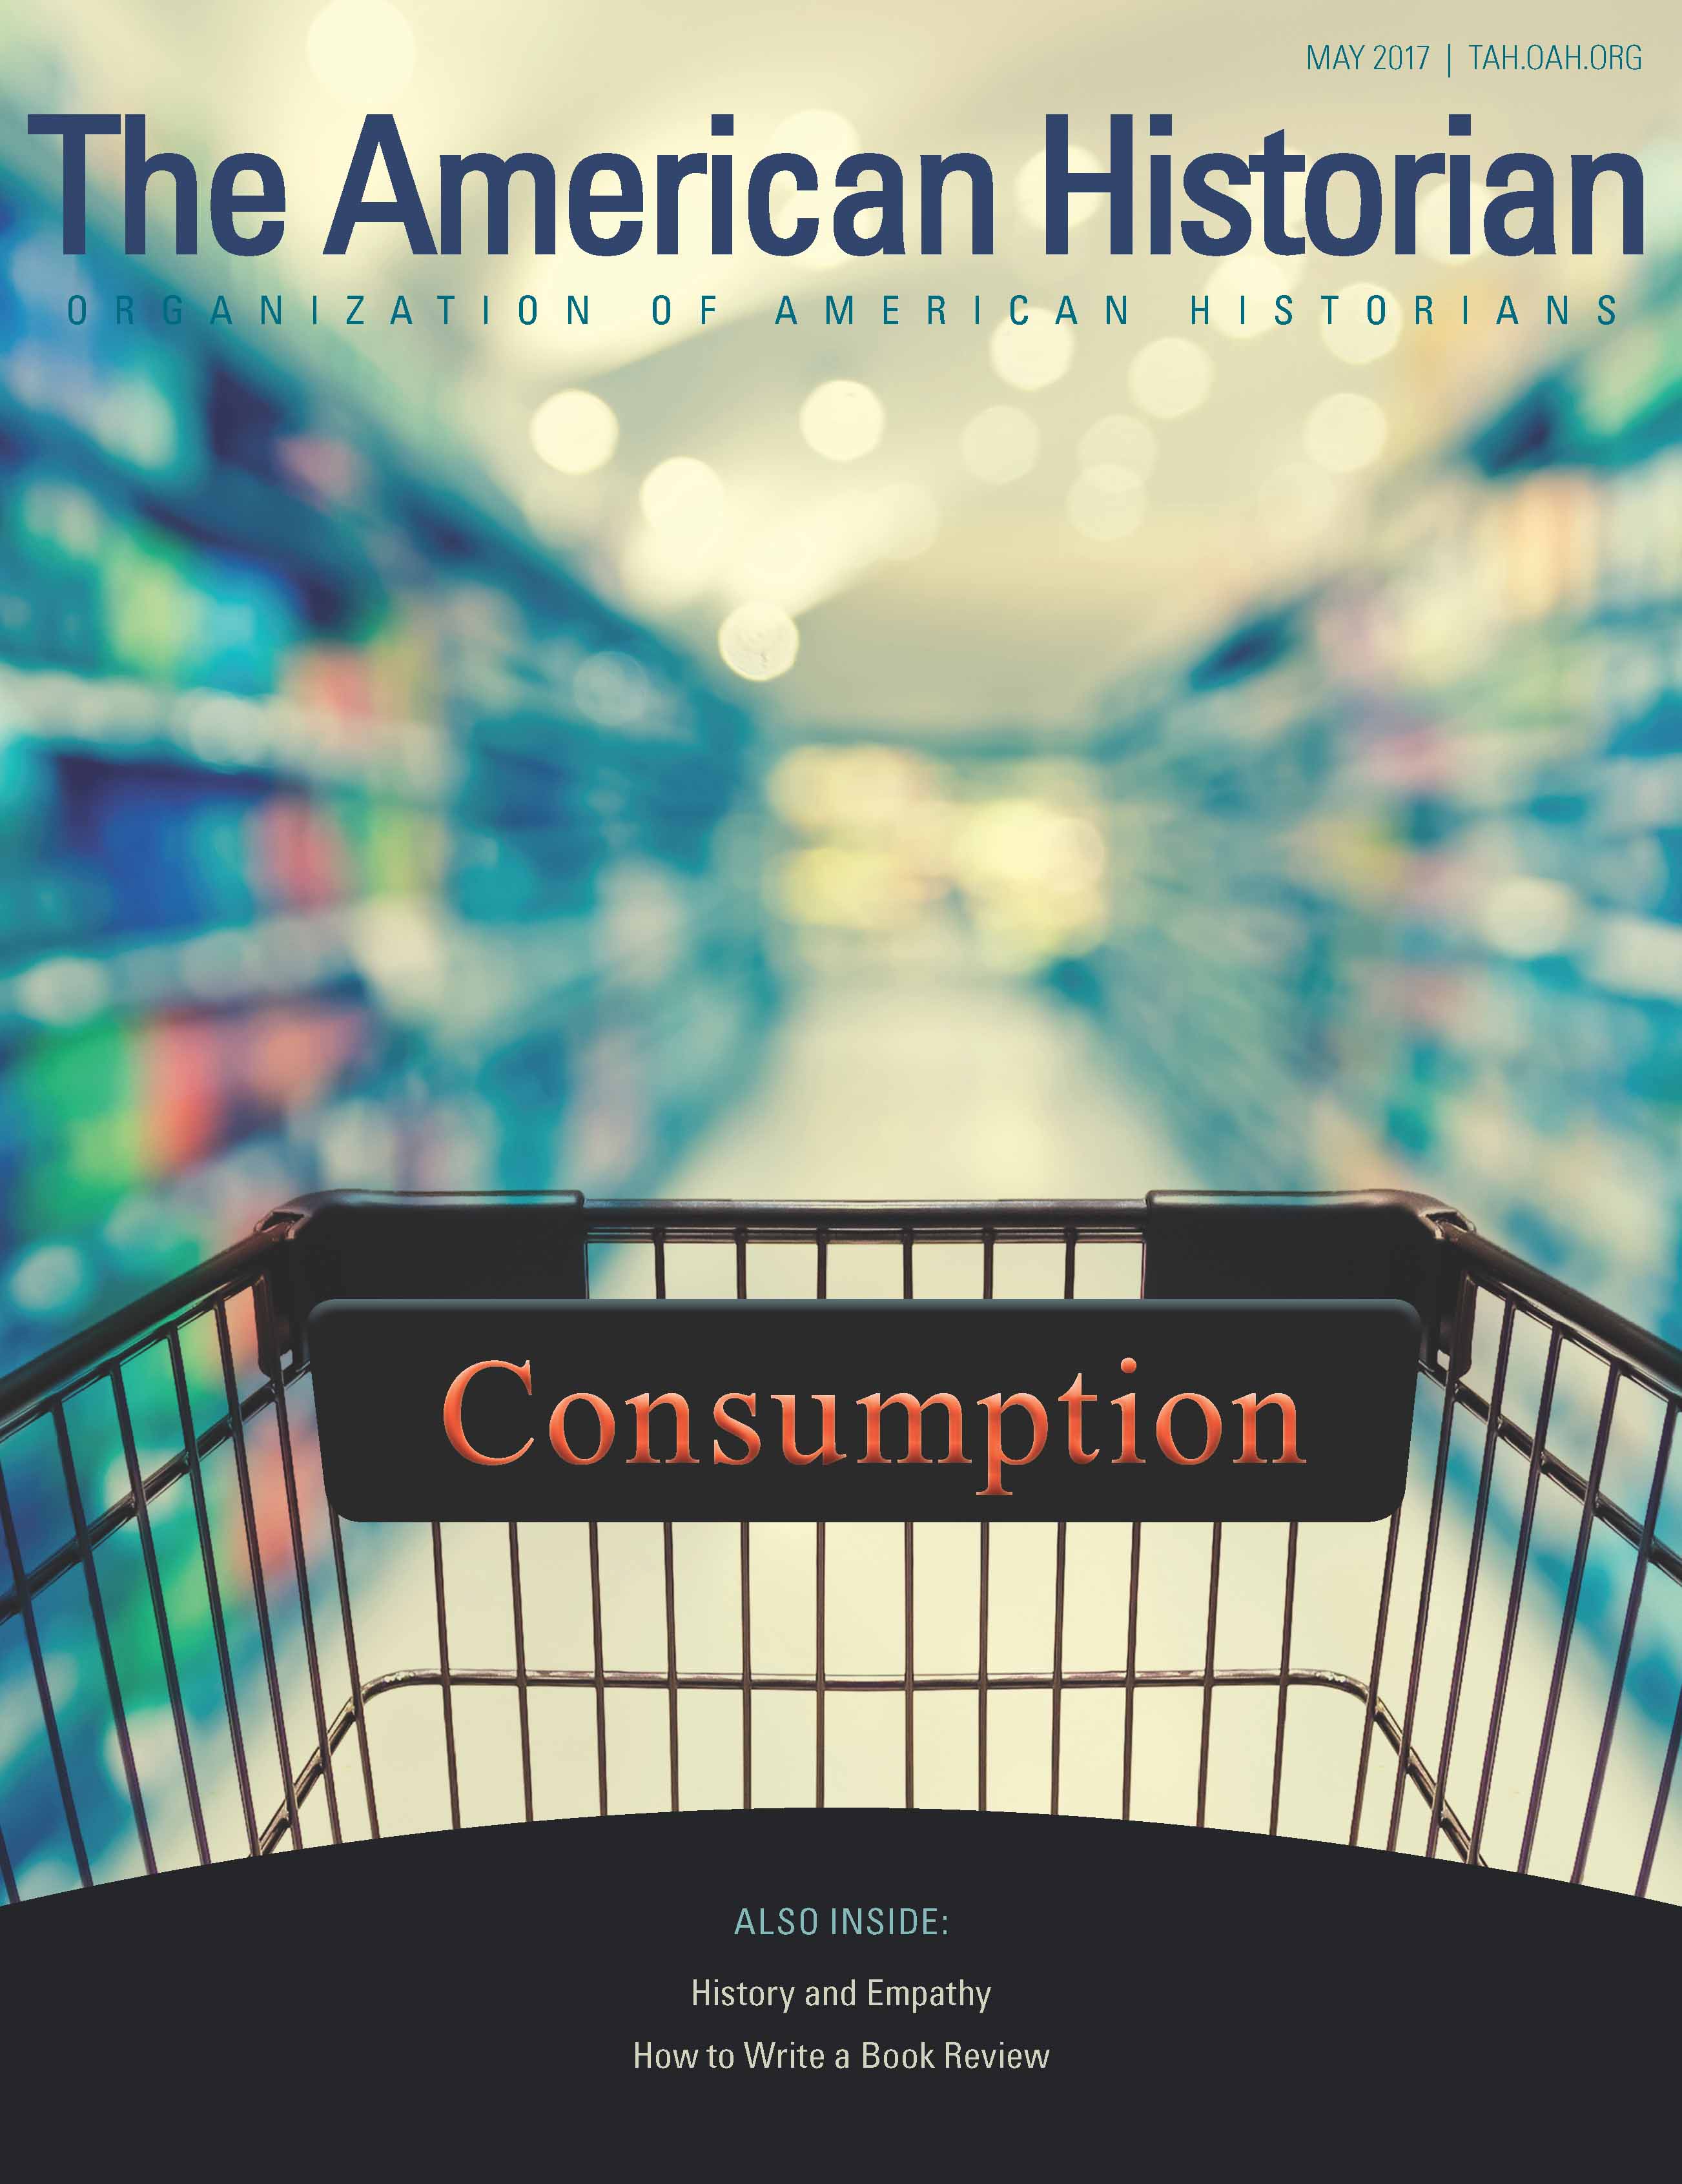 This issue's cover is of a shopping cart in the isle of a store with the title 